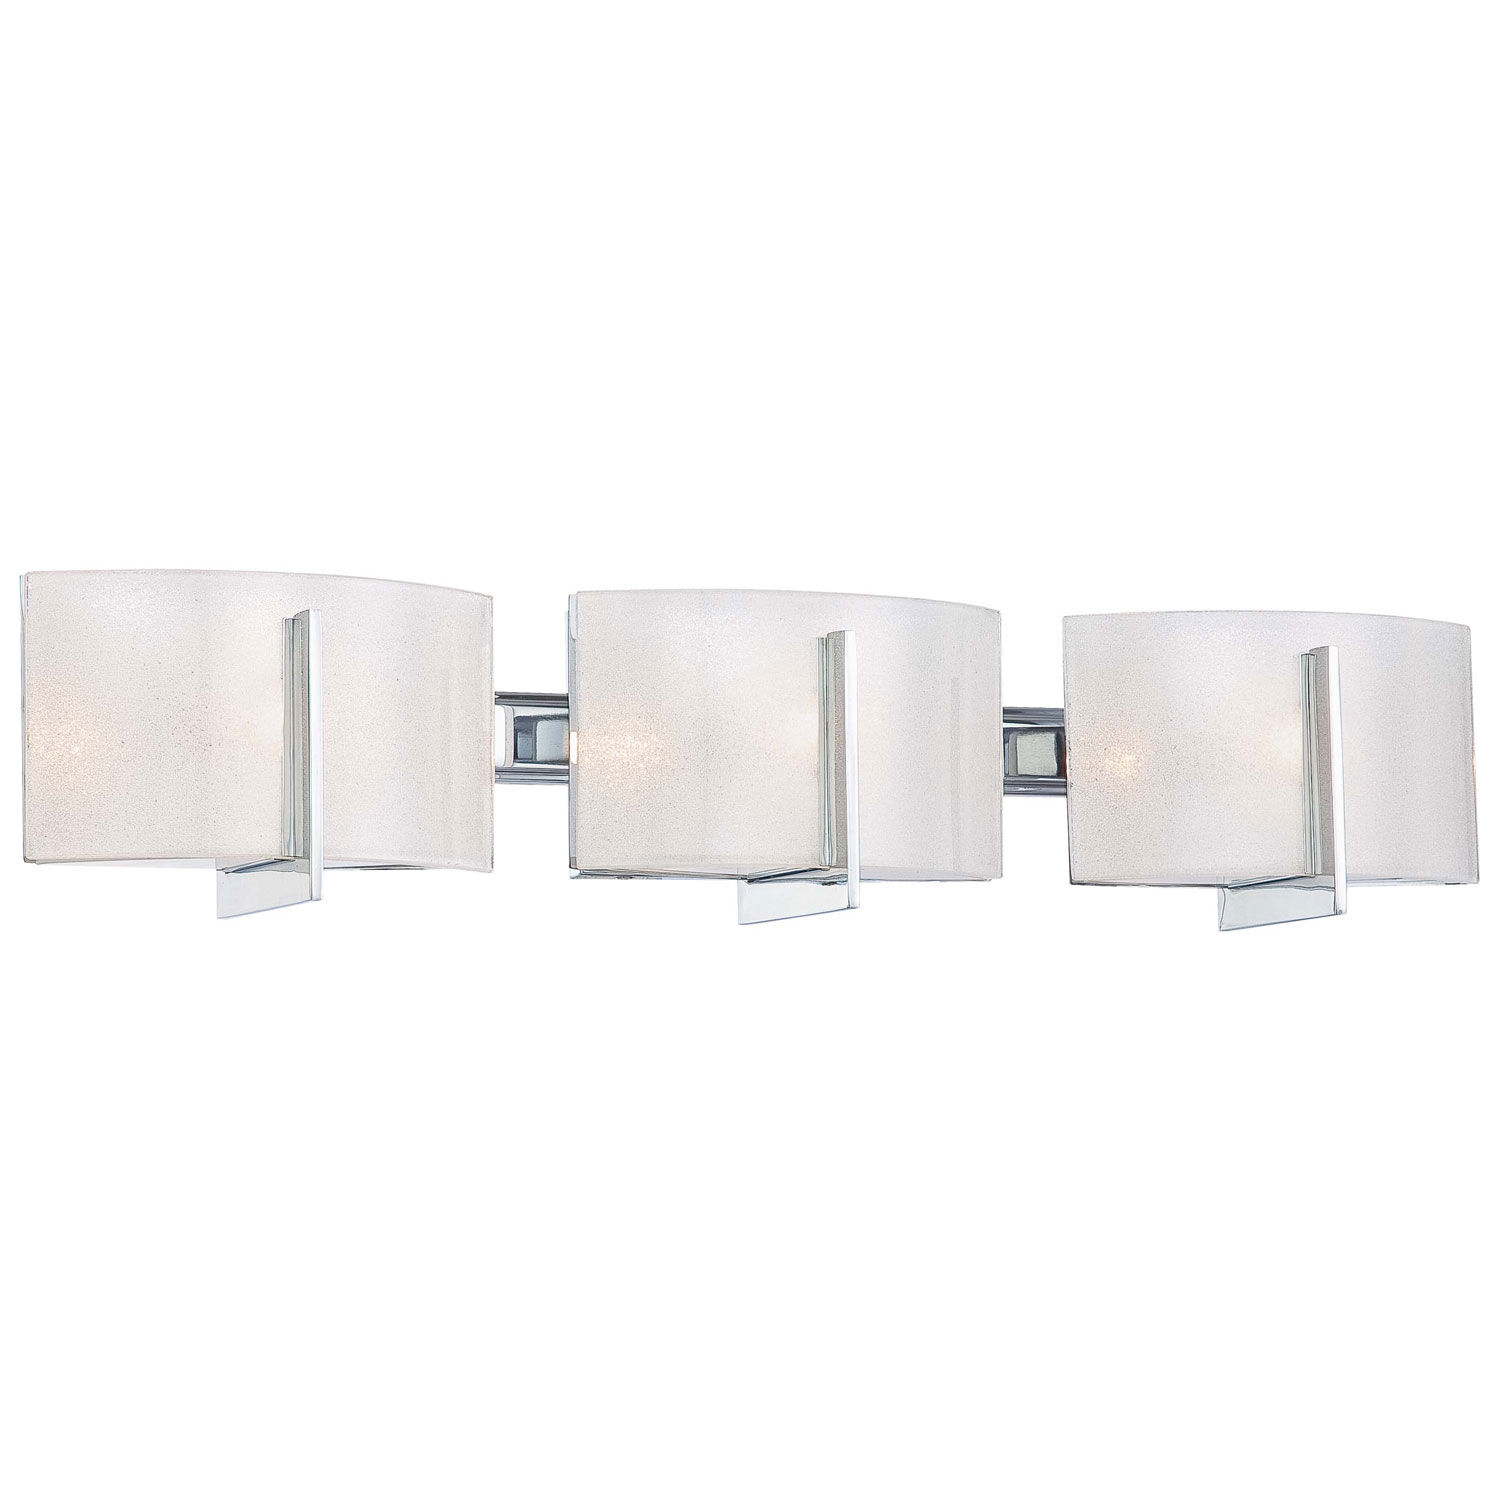 Clarte Wall Sconce 4393 By Minka-Lavery Chrome With White Iris Frosted 3 Light 